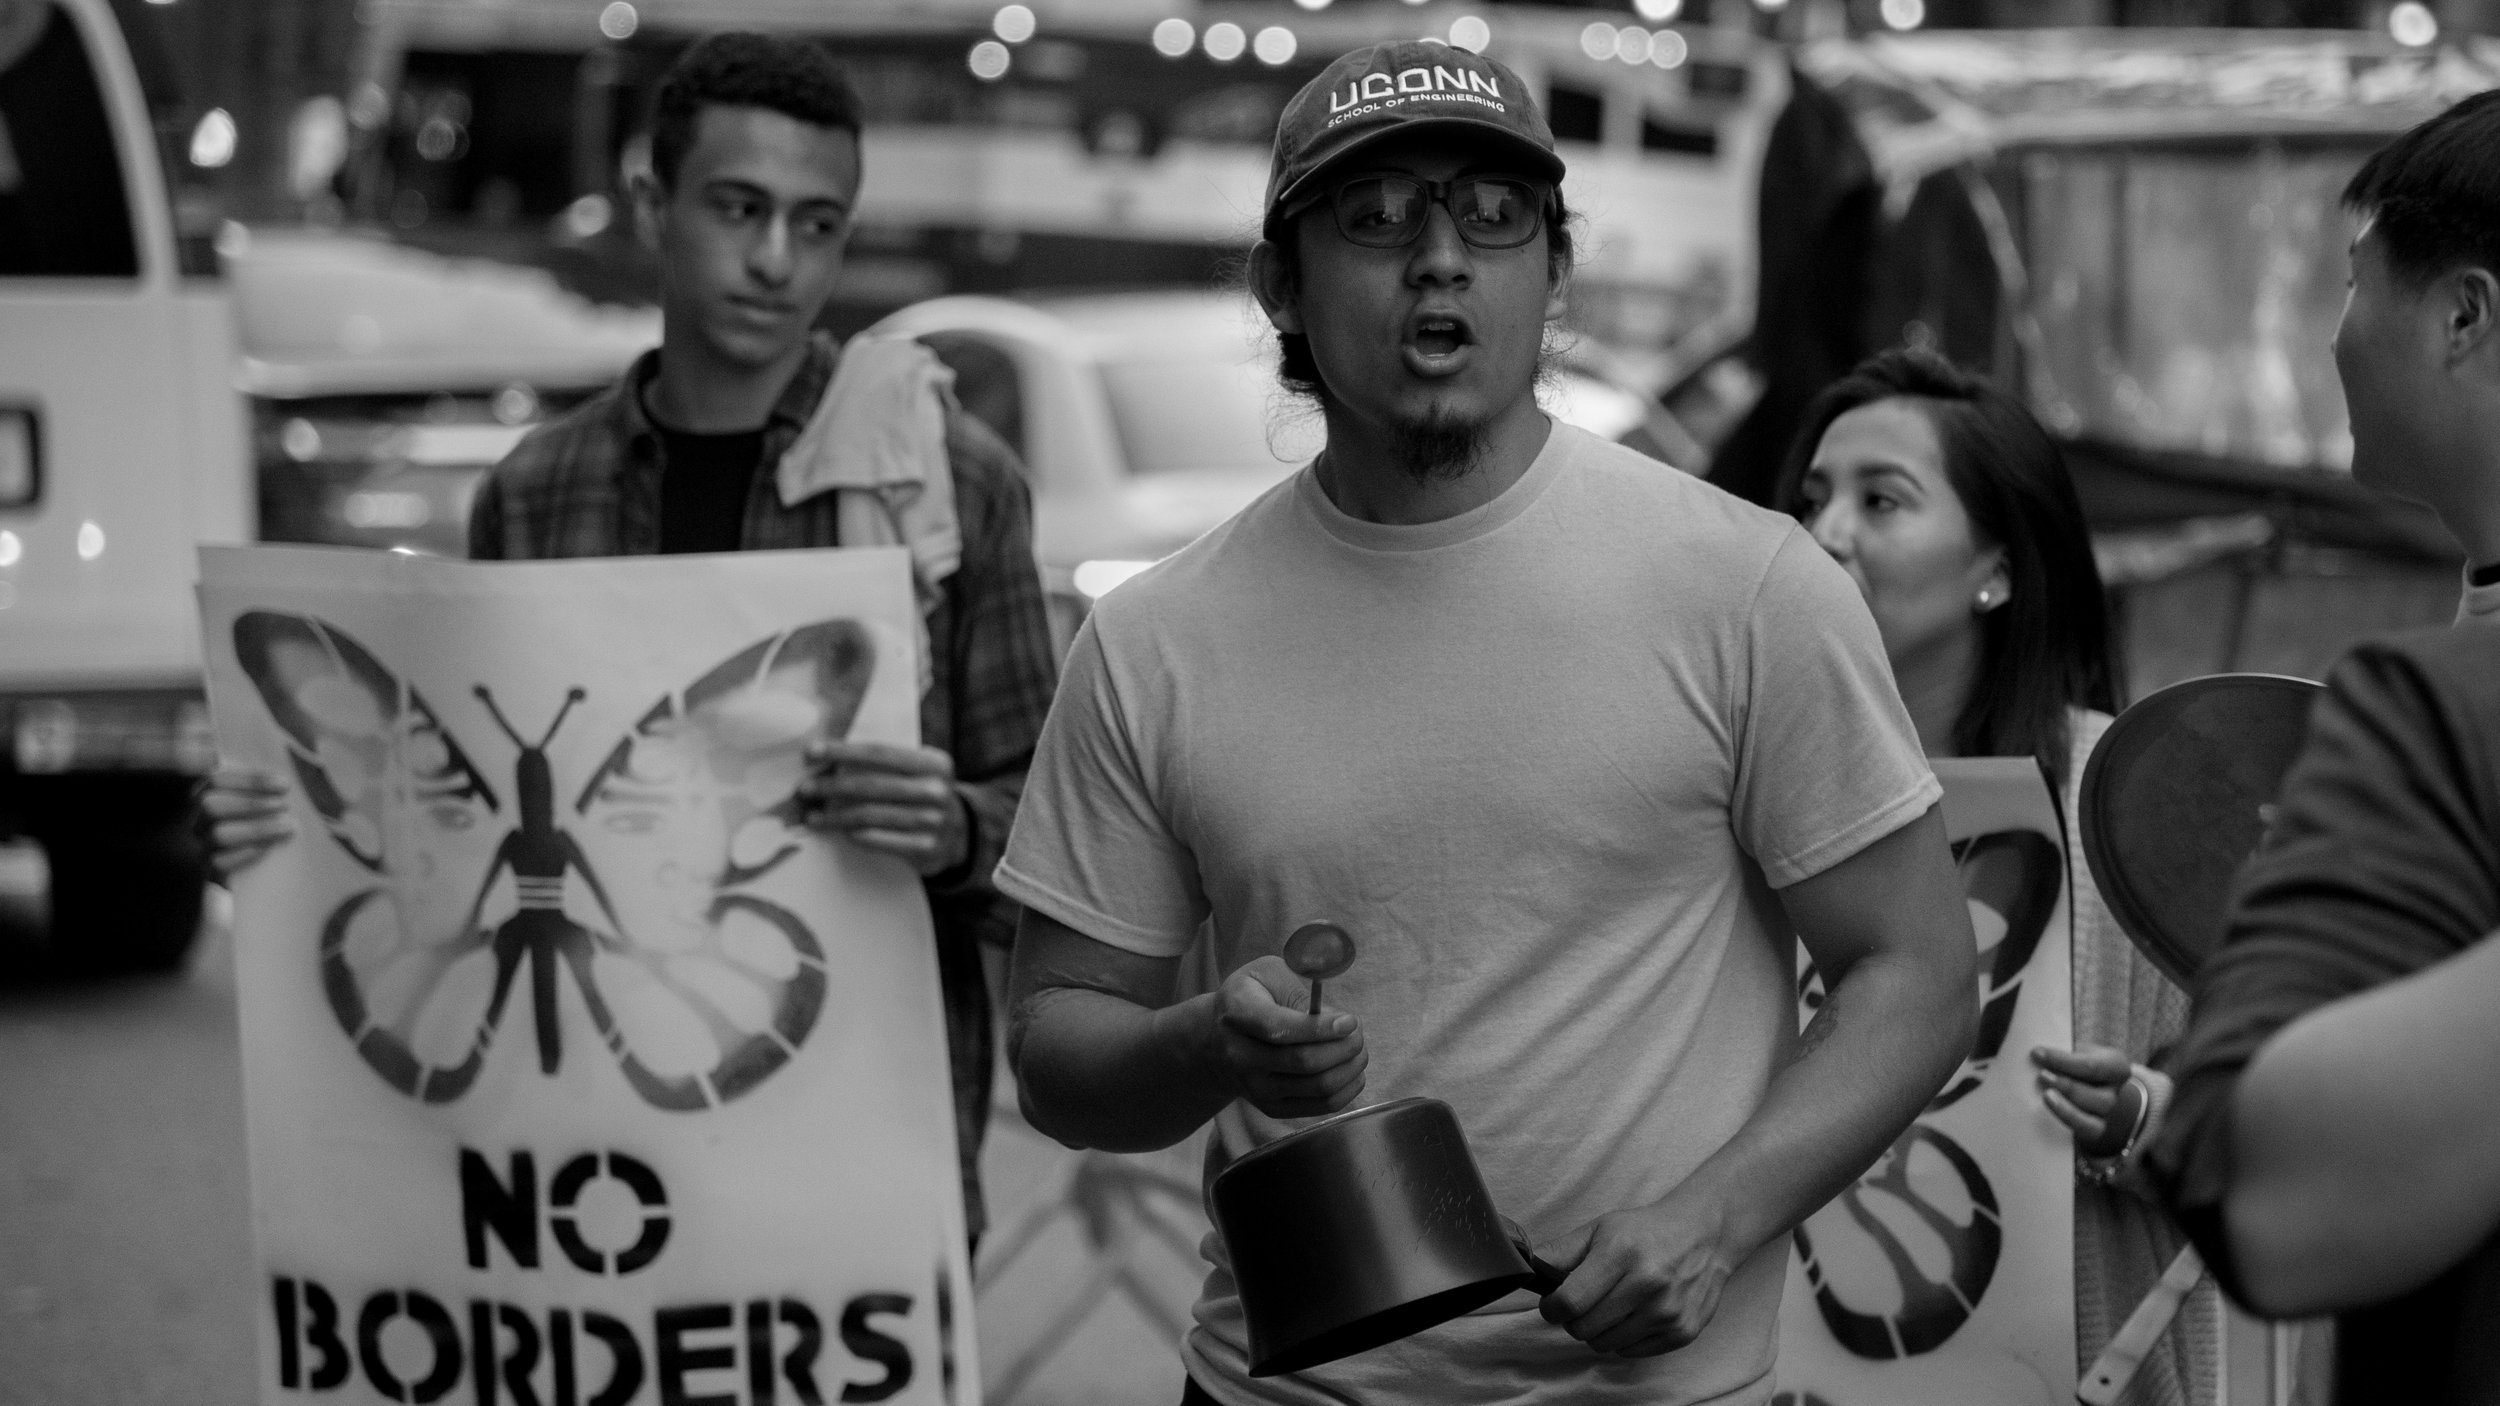  &nbsp;Eric joins other protesters in front of Trump Tower in New York City back in October, ahead of the election. In his work with immigration reform, Eric has become a community organizer for Connecticut Students 4 a Dream (C4D) and United We Drea